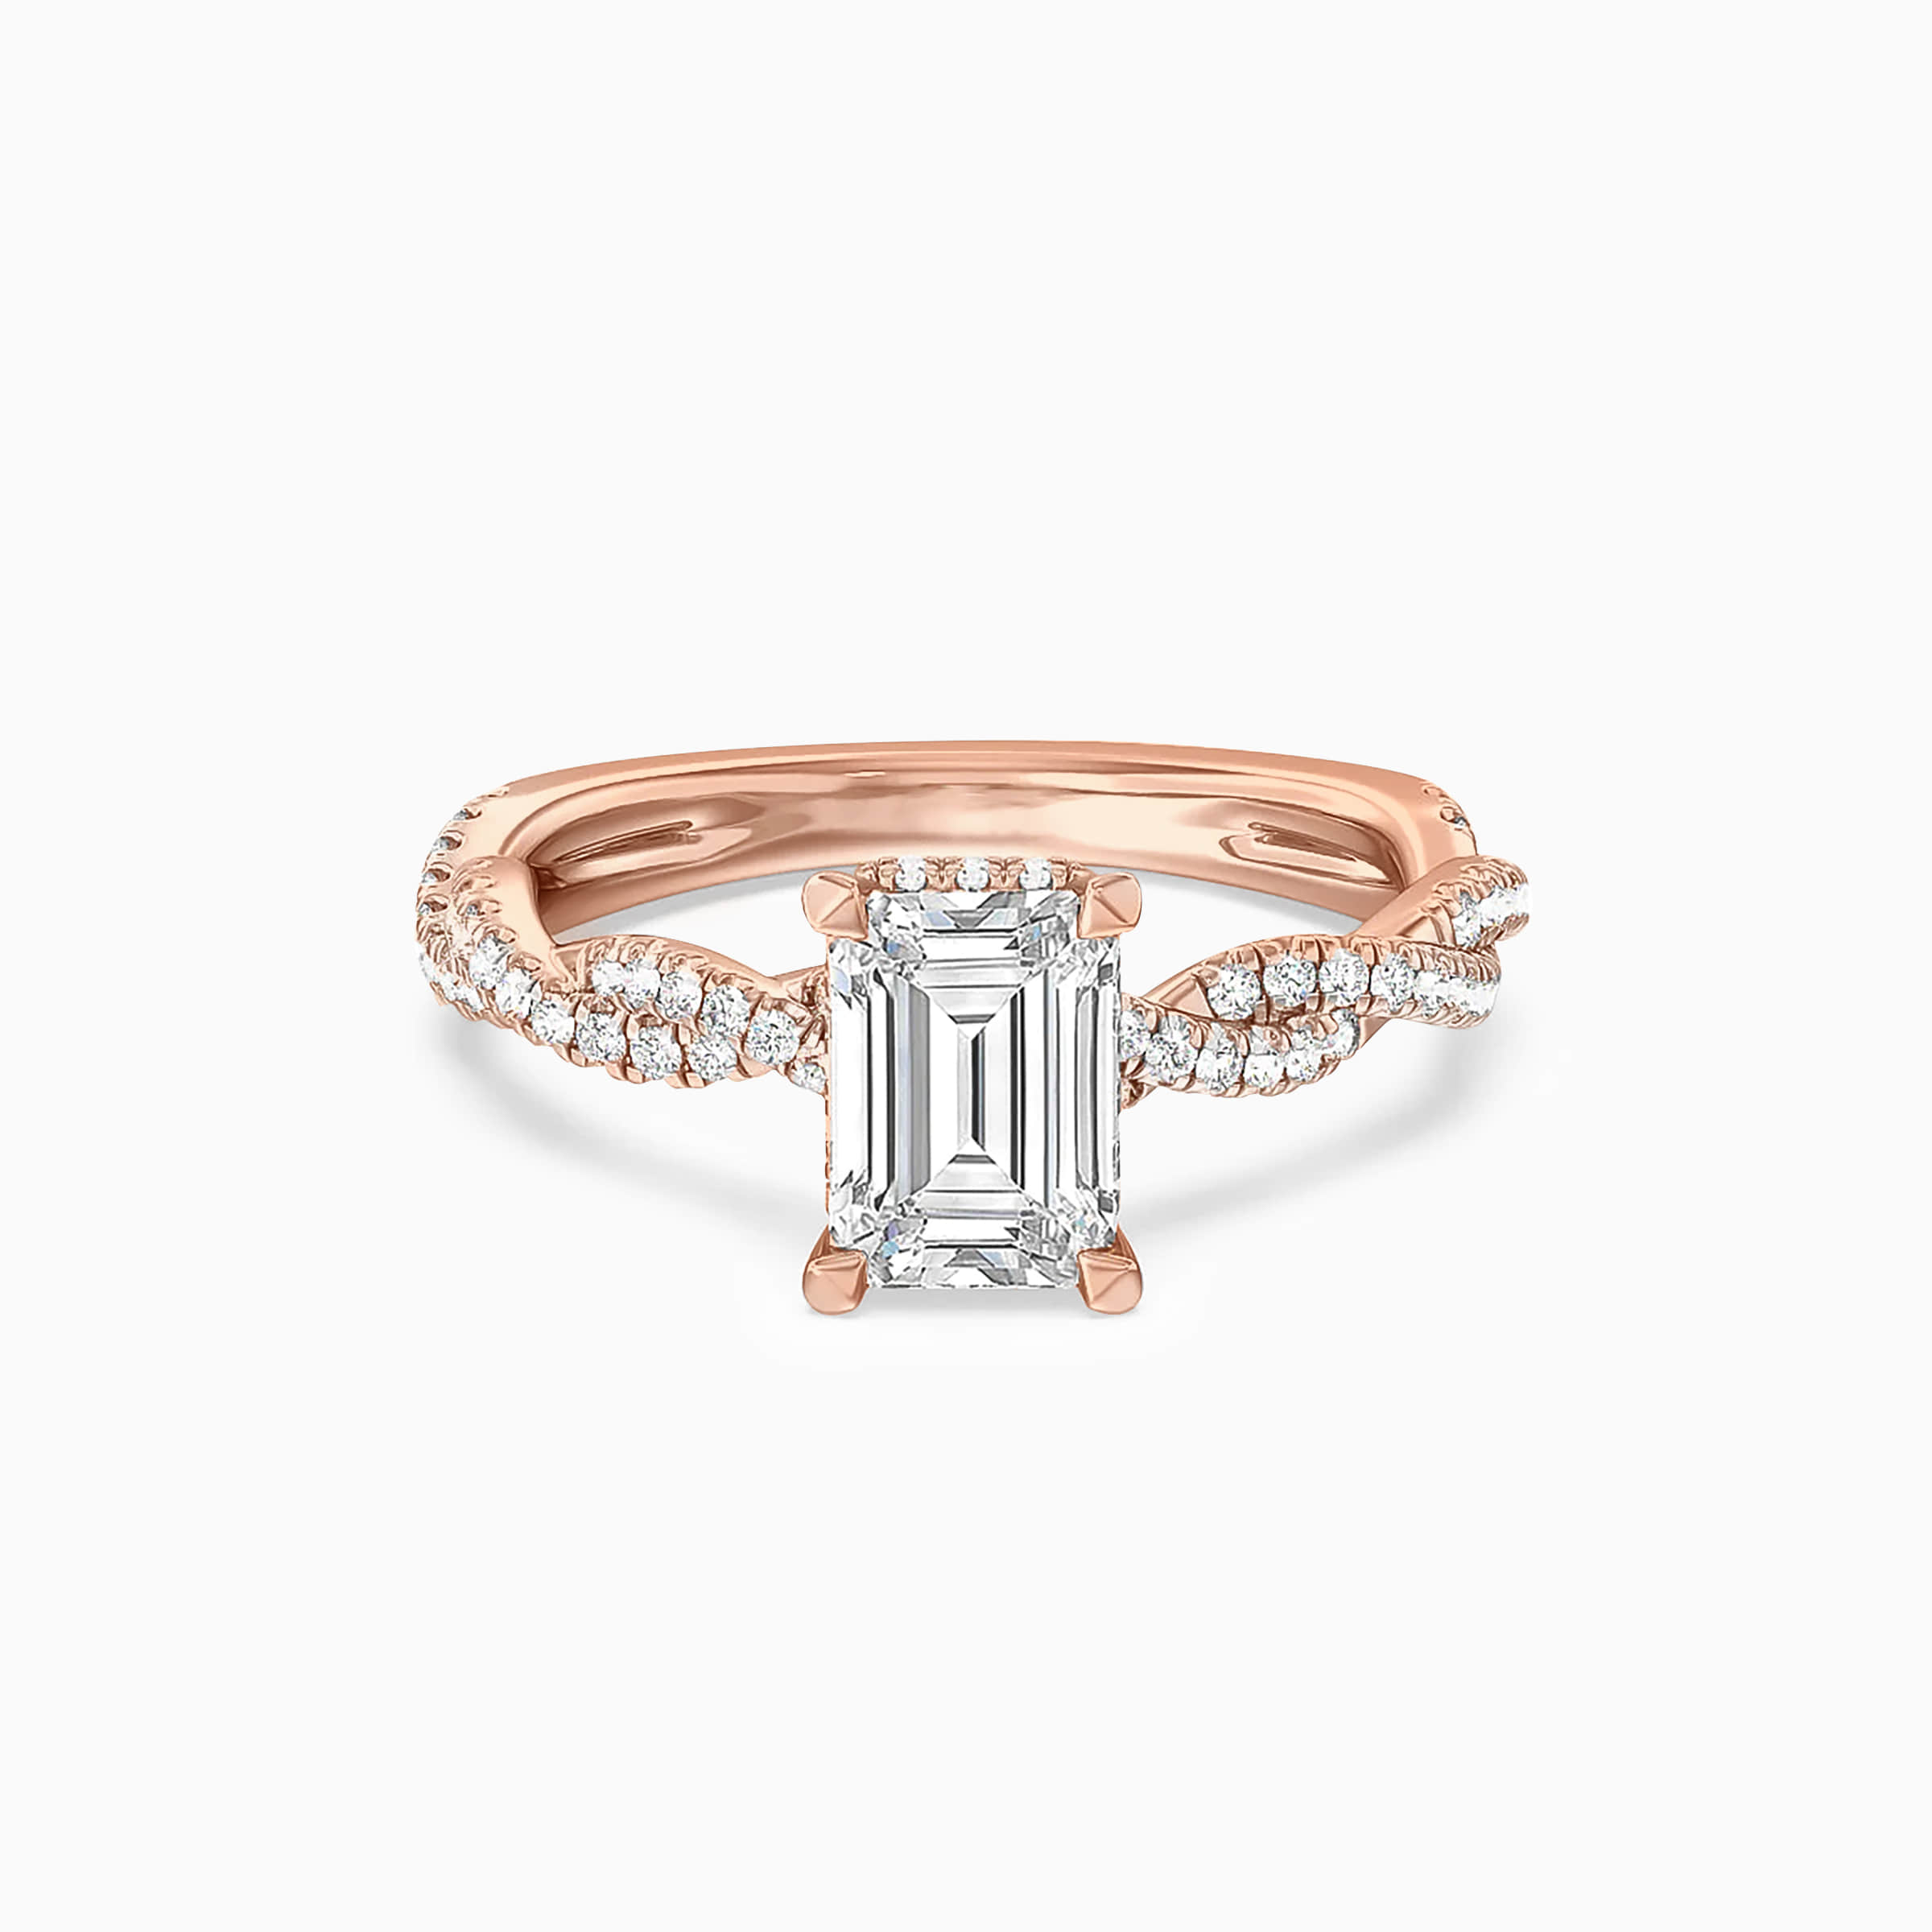 Darry Ring emerald cut twisted band enaggement ring rose gold